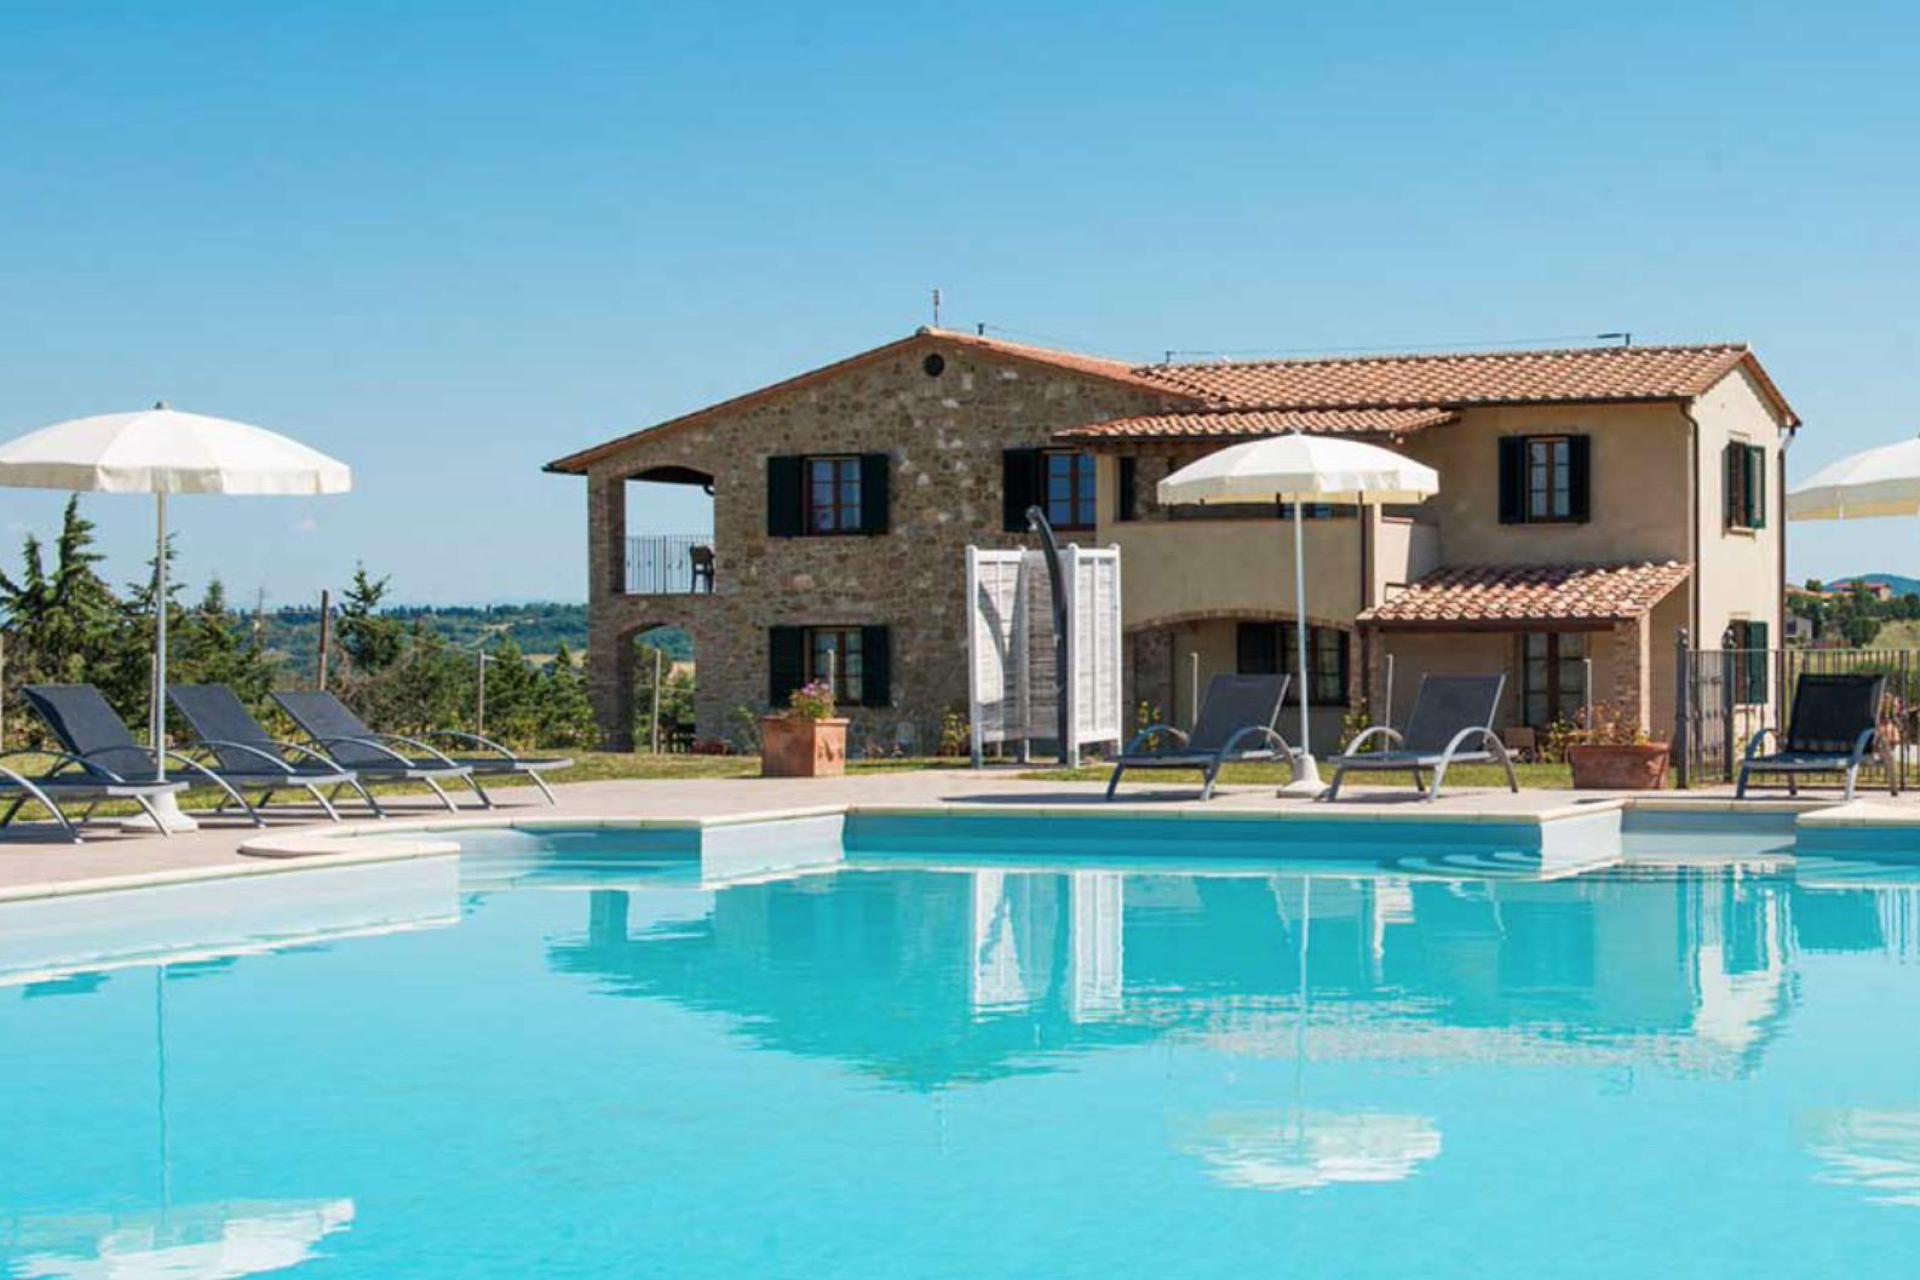 1. Ideal agriturismo for families with children